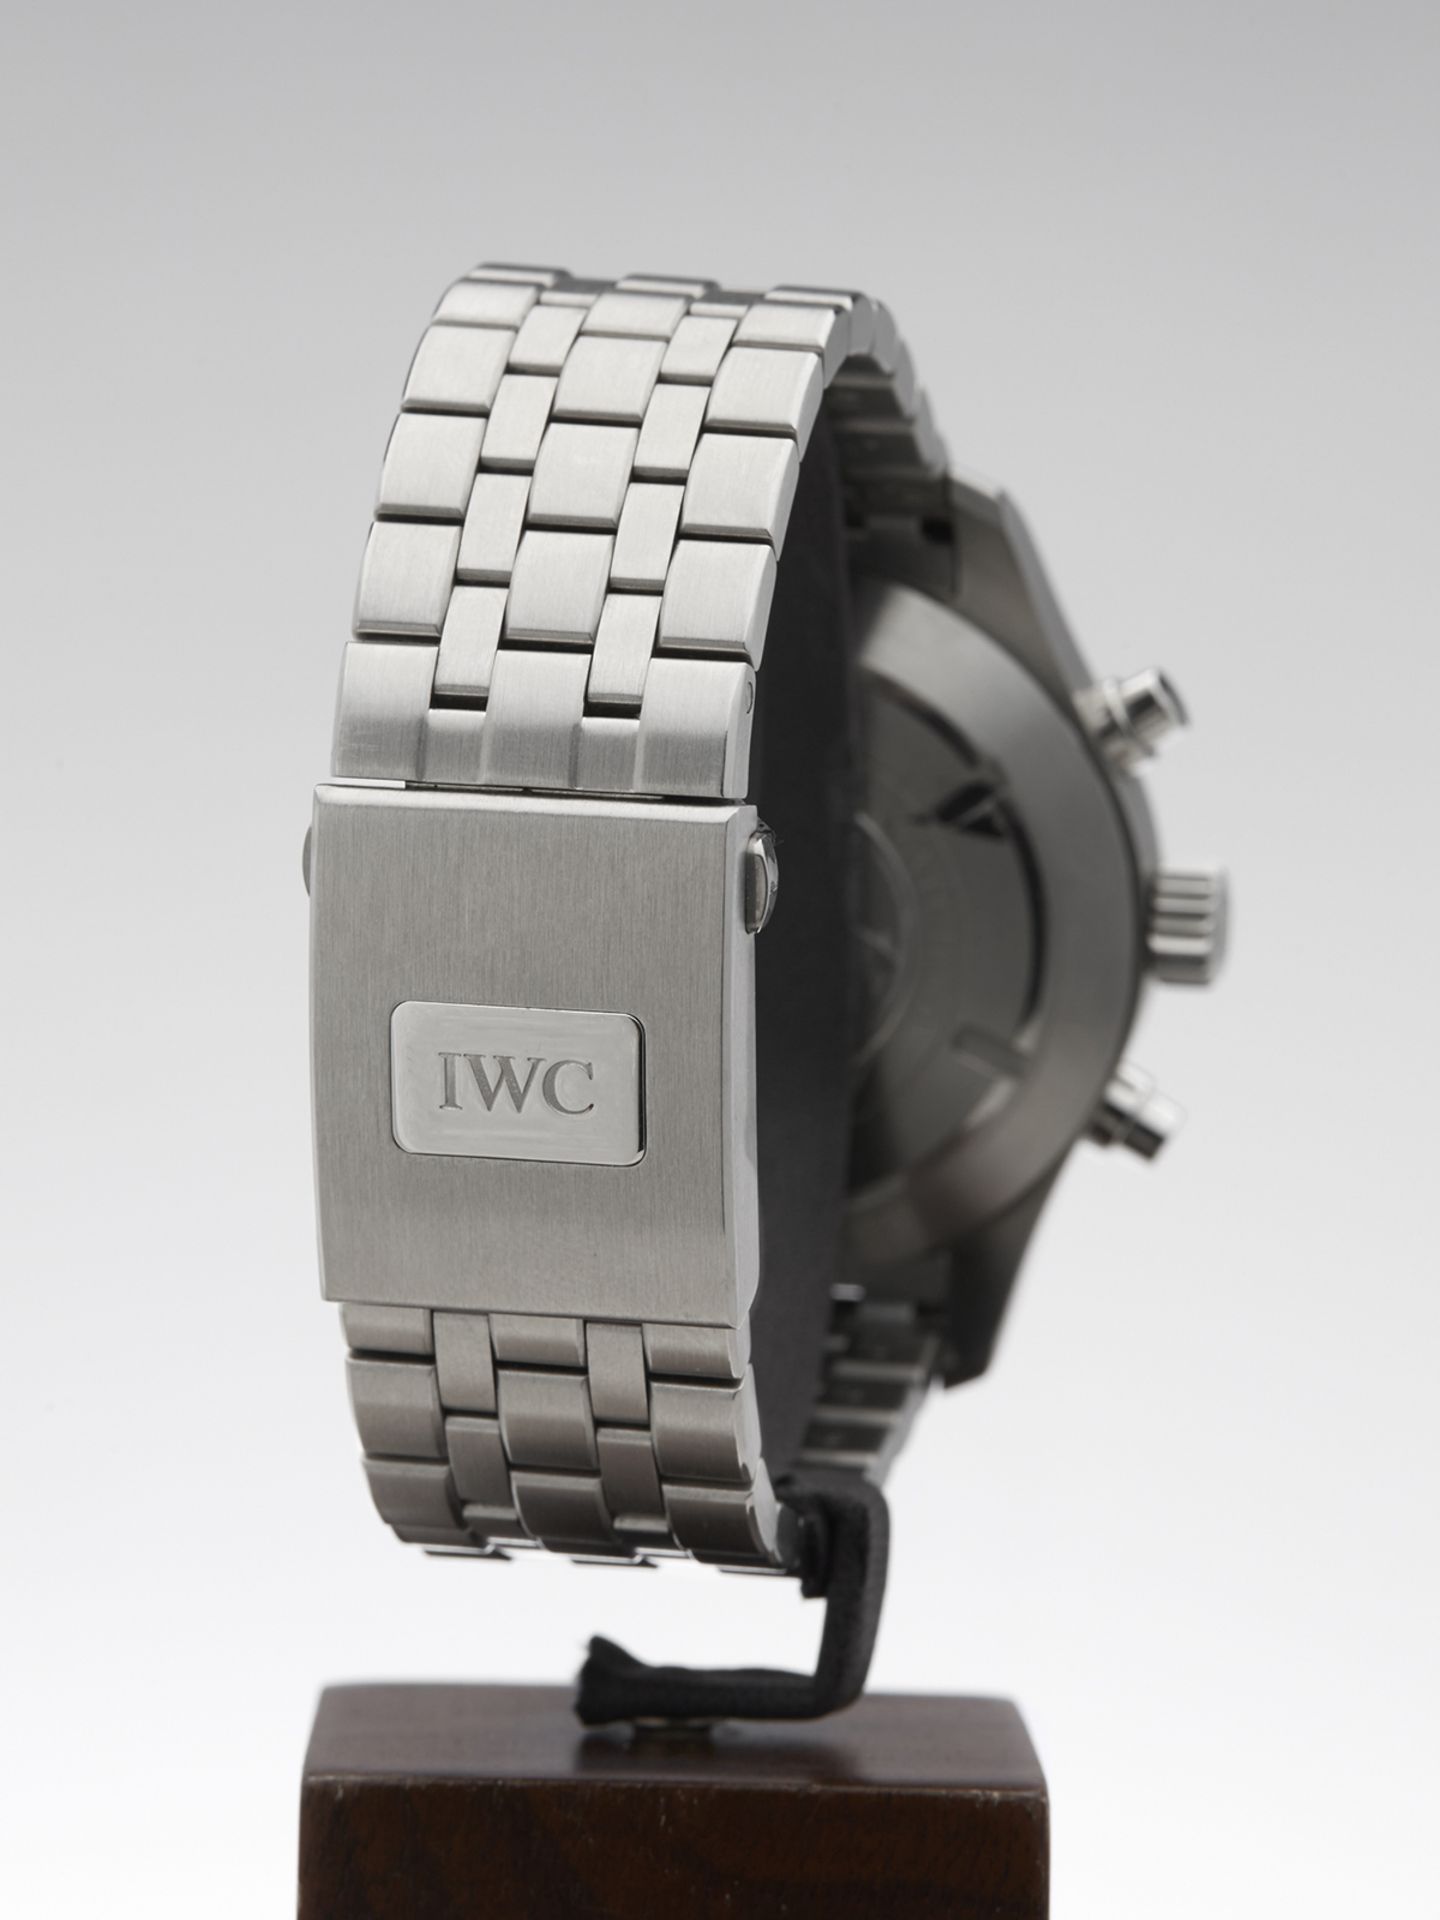 IWC Pilot's Chronograph Spitfire 43mm Stainless Steel IW387804 - Image 7 of 9